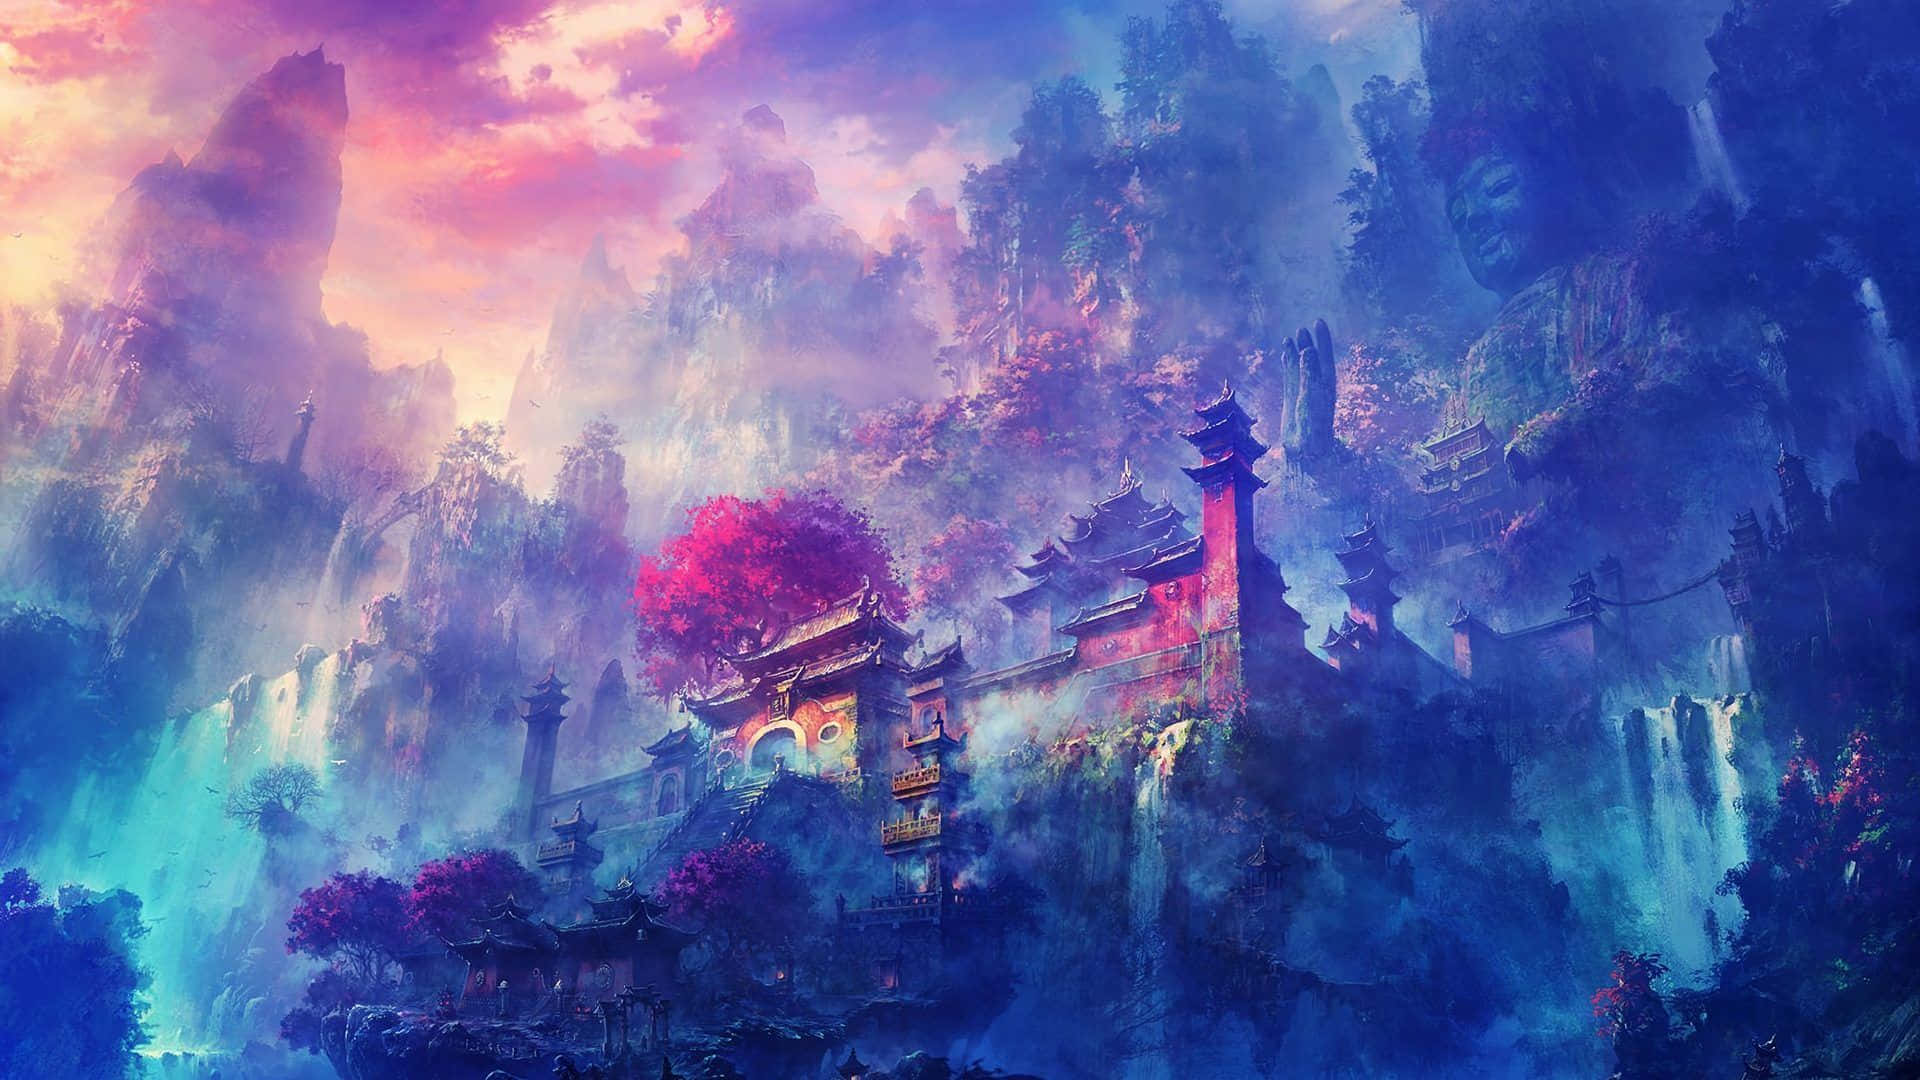 Download A Painting Of A Chinese Village With Waterfalls And Trees